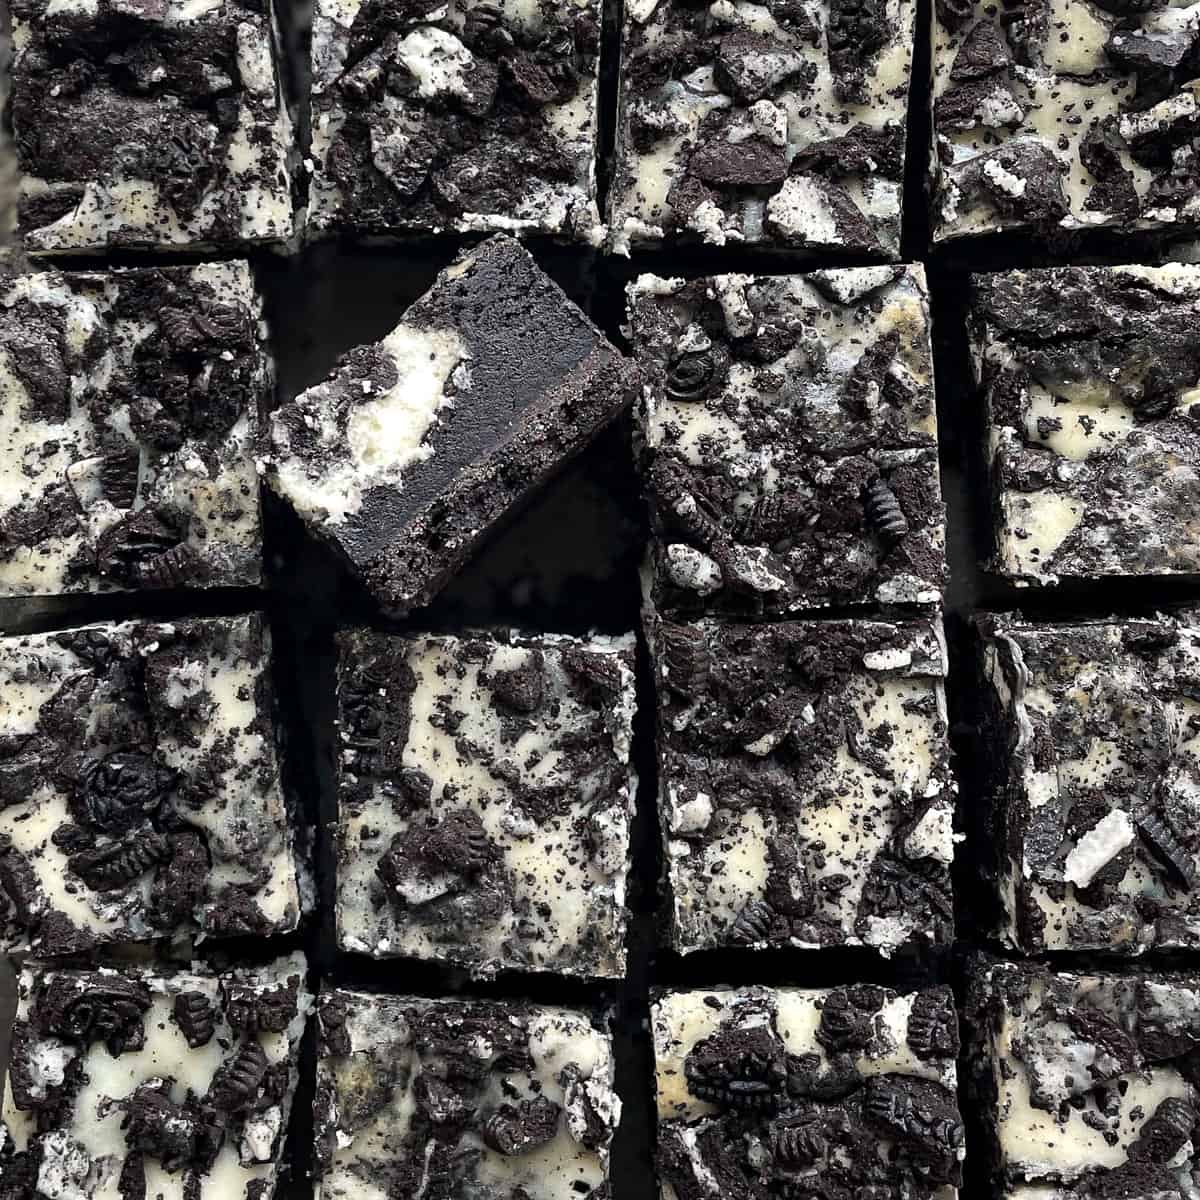 sixteen cut oreo cheesecake brownies with one showing layers on its side.